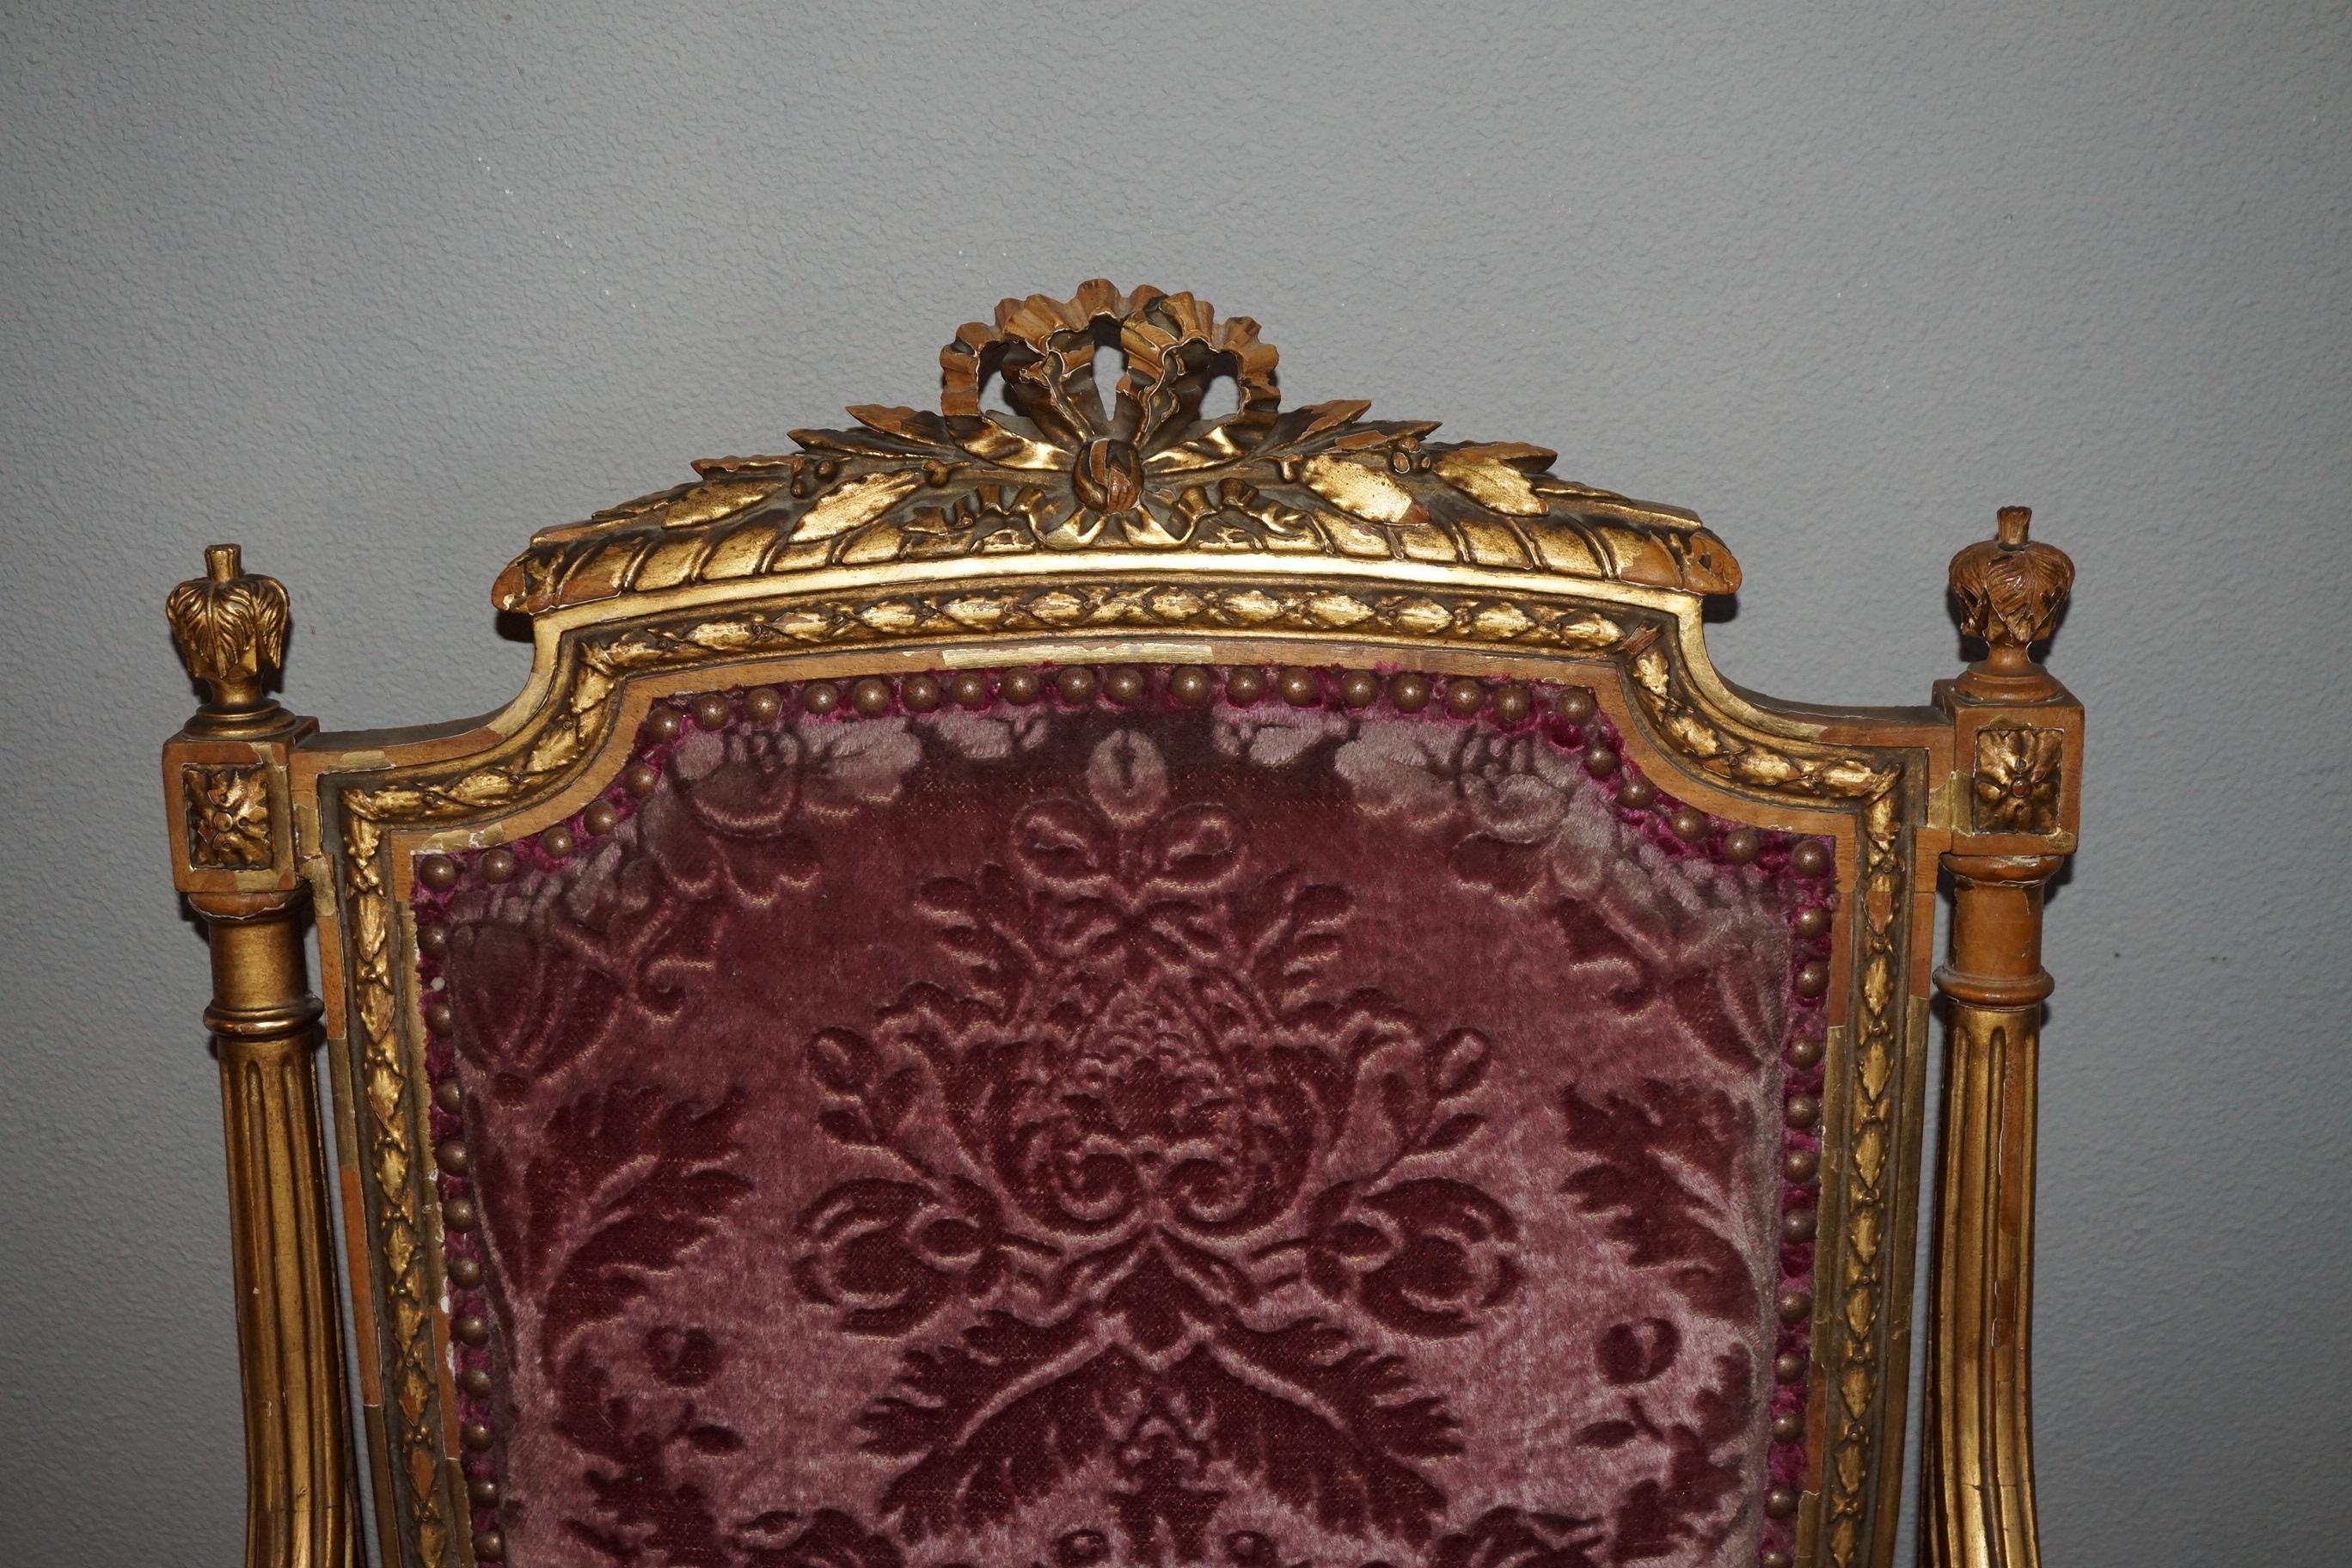 Rare and great quality carved chair.

This antique chair from the late 1800s is structurally as sound as can be and the details in the carved Louis Seize style elements are of very good quality. As you can see in our images, some of the gilding